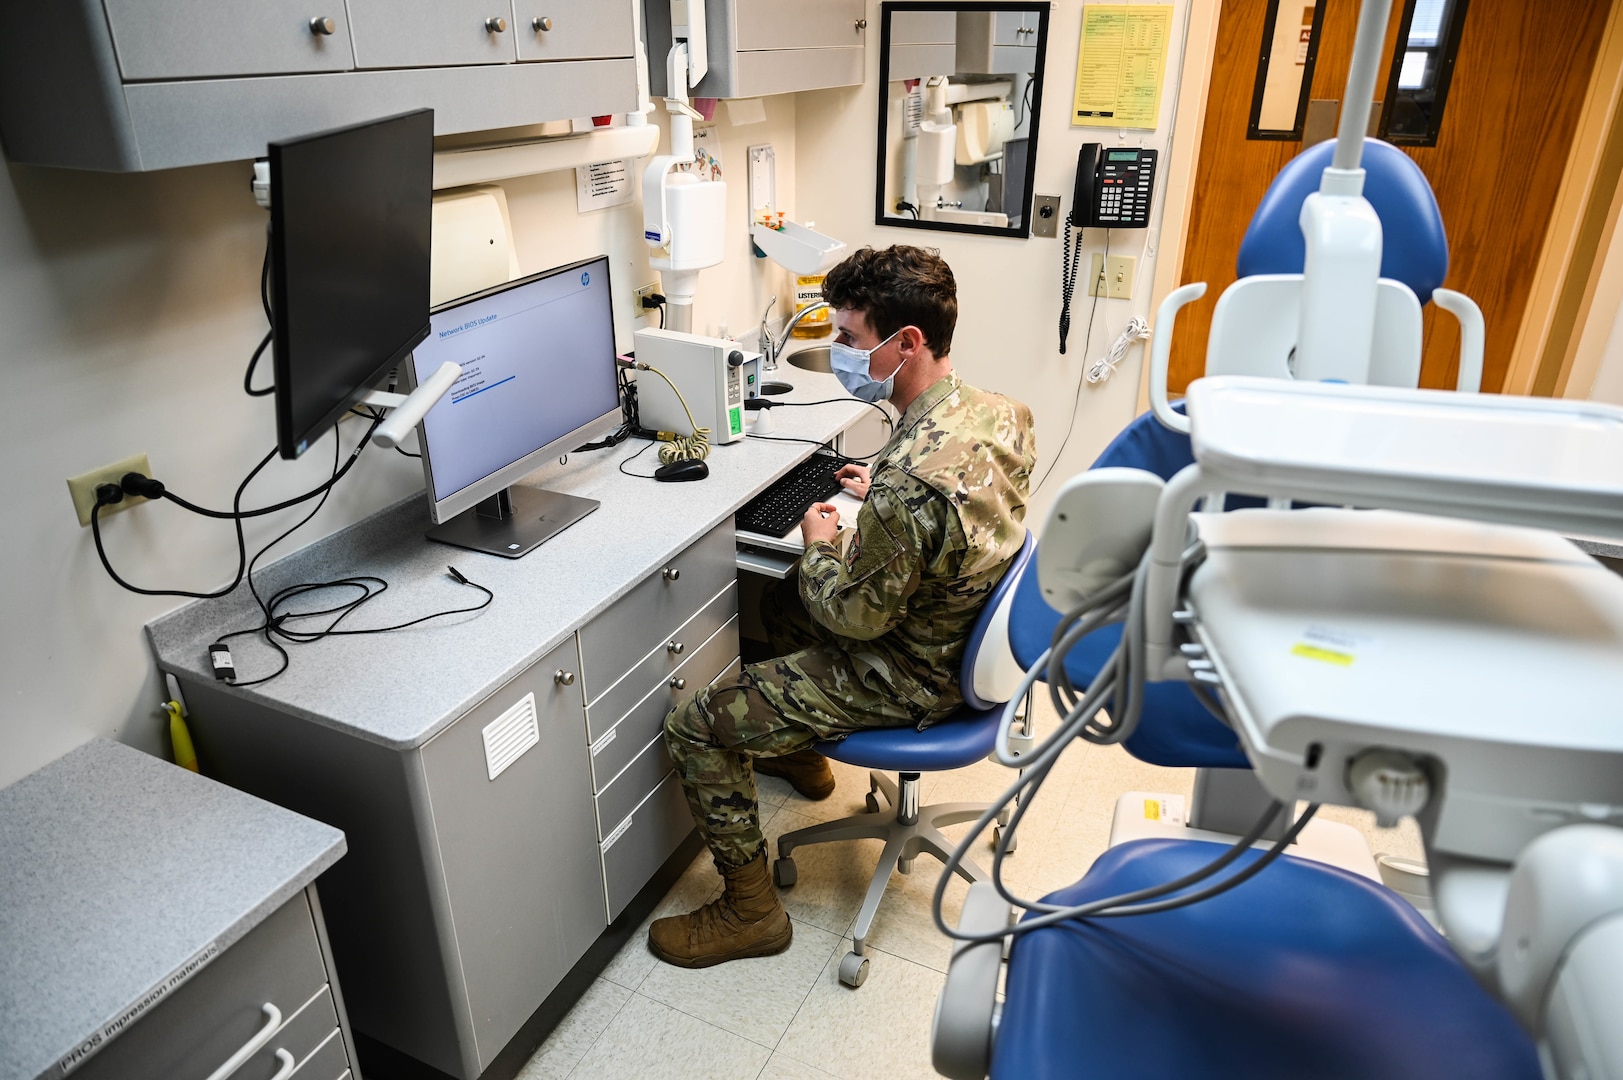 Airman 1st Class Paul Hasler, 15th Medical Group Medical Information Systems Flight technician, reimages a medical workstation in the dental clinic at Joint Base Pearl Harbor-Hickam, Hawaii, Feb. 24, 2022. The flight configured, deployed and tested more than 200 new pieces of hardware for Medical Healthcare System Genesis, which was brought online Sept. 25, 2021. (U.S. Air Force photo by Staff Sgt. Alan Ricker)